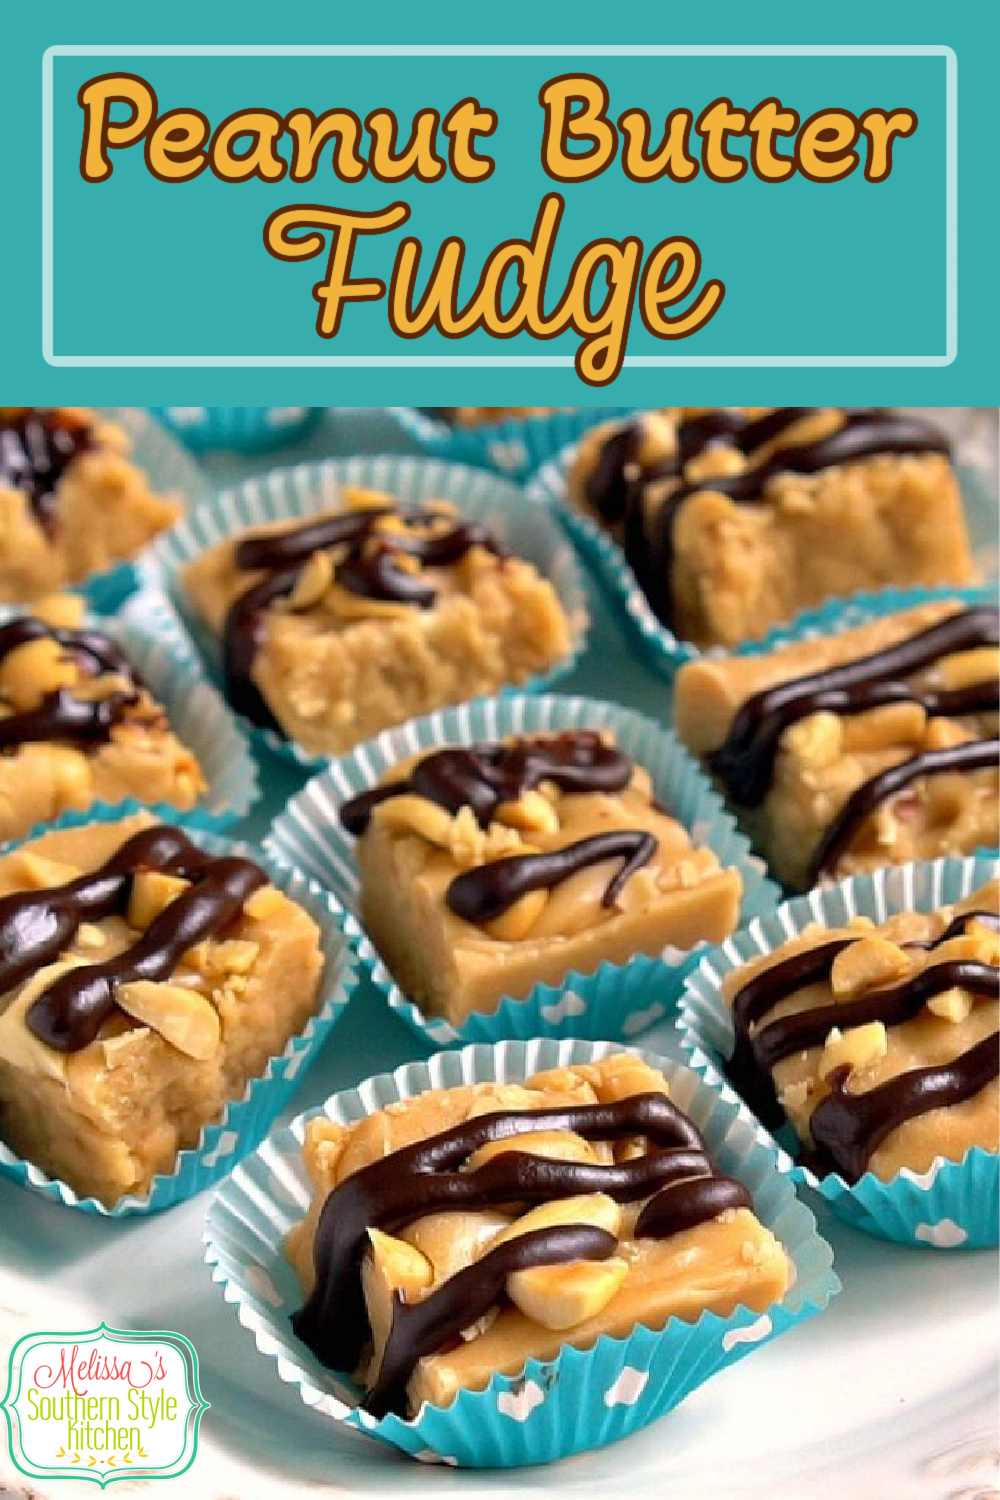 This chocolate drizzled Peanut Butter Fudge is impossible to resist #peanutbutterfudge #fudge #chocolate #sweets #candy #fudgerecipes #christmascandy #peanutbutterrecipes #desserts #dessertfoodrecipes #holidayrecipes #southernfood #southernrecipes